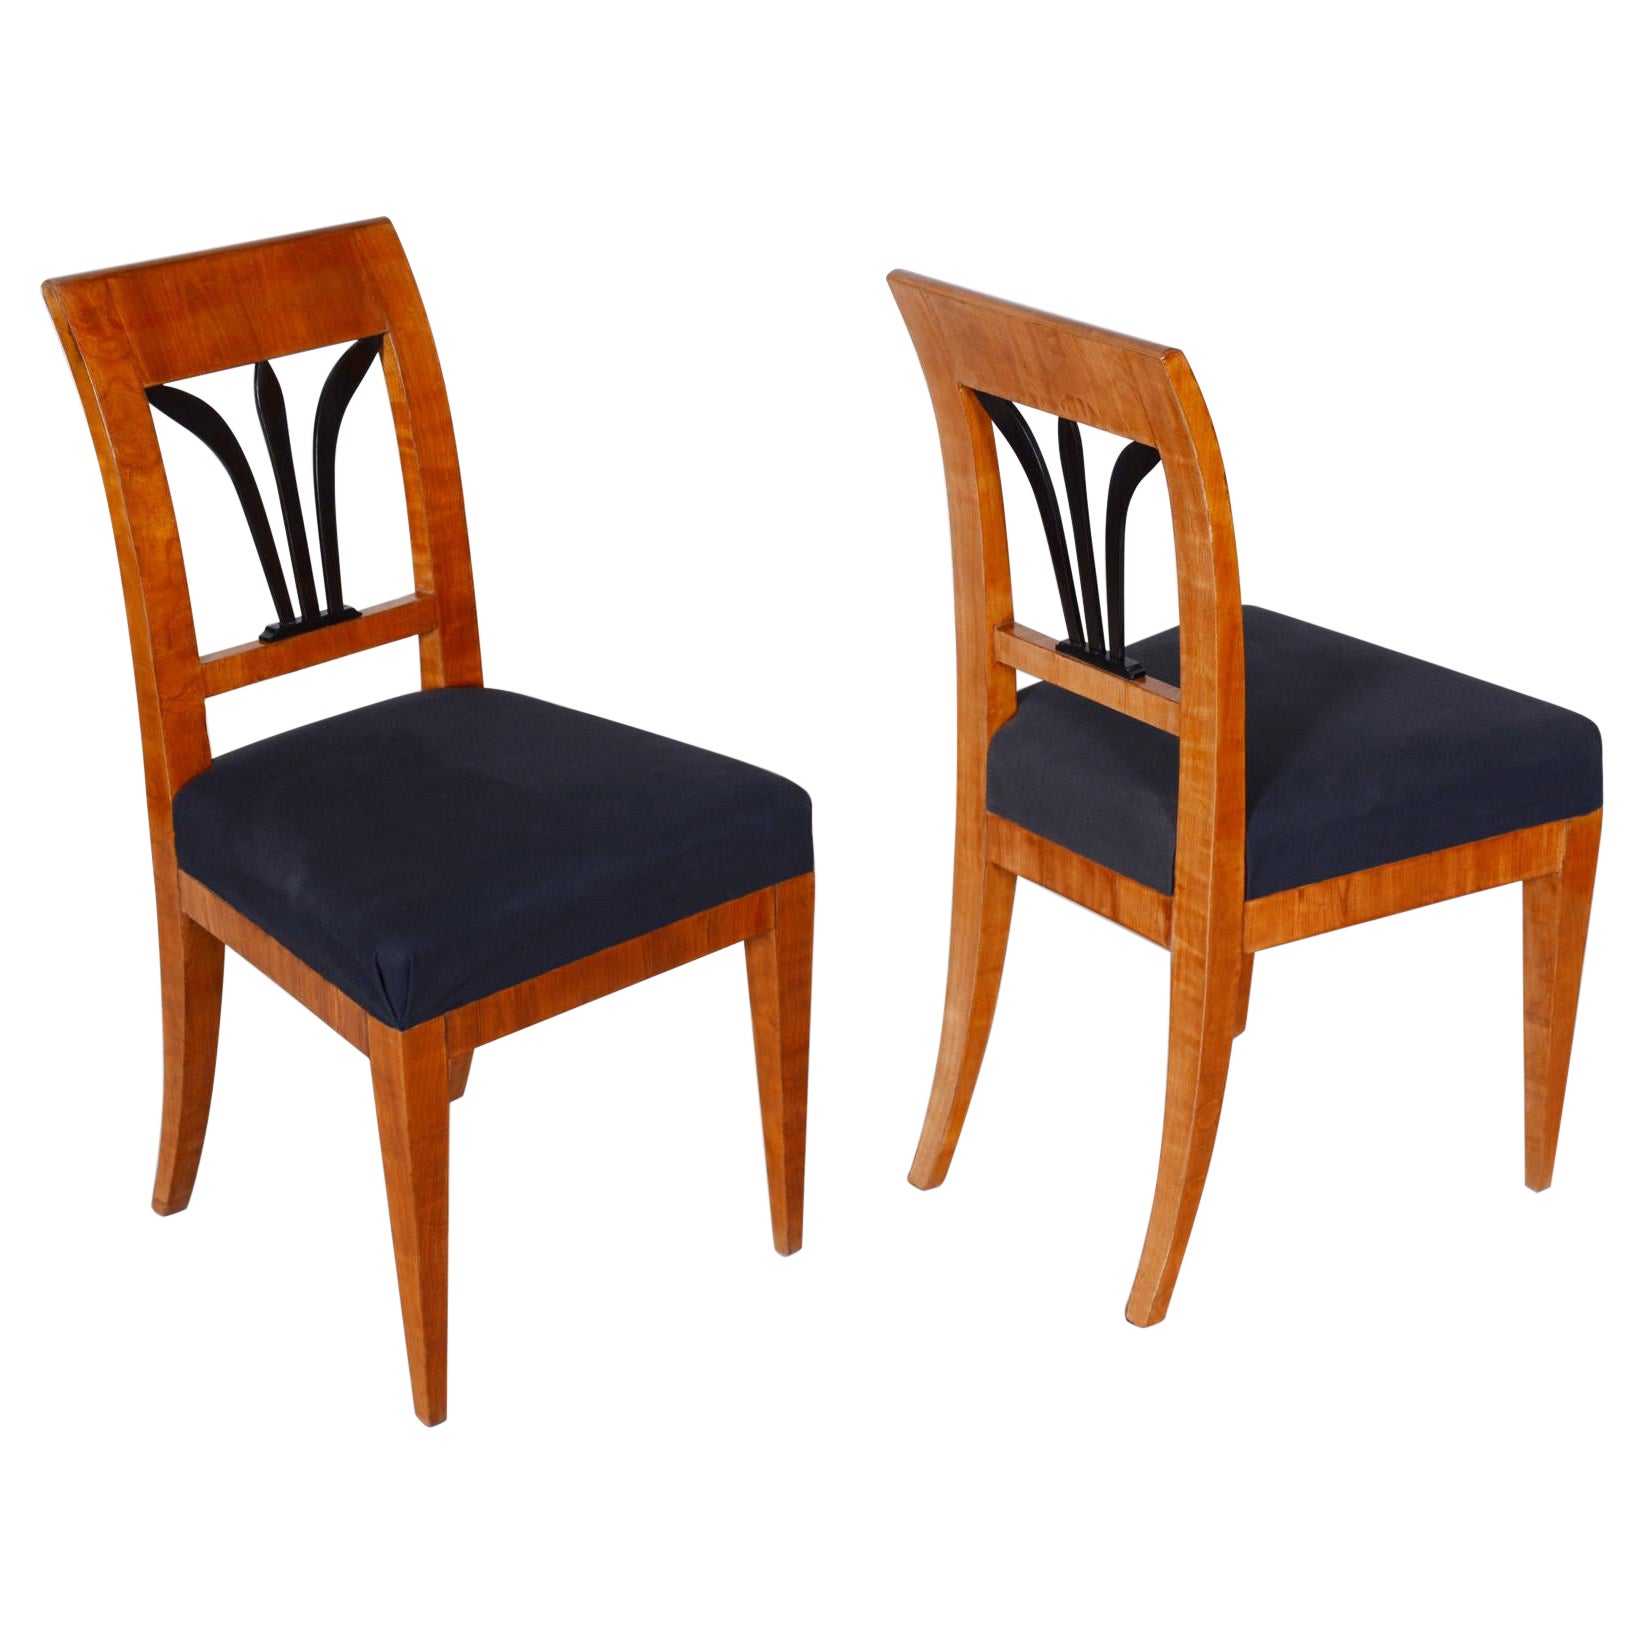 Pair of Biedermeier Dining Chairs Made in Czechia circa 1830s, Restored Cherry For Sale